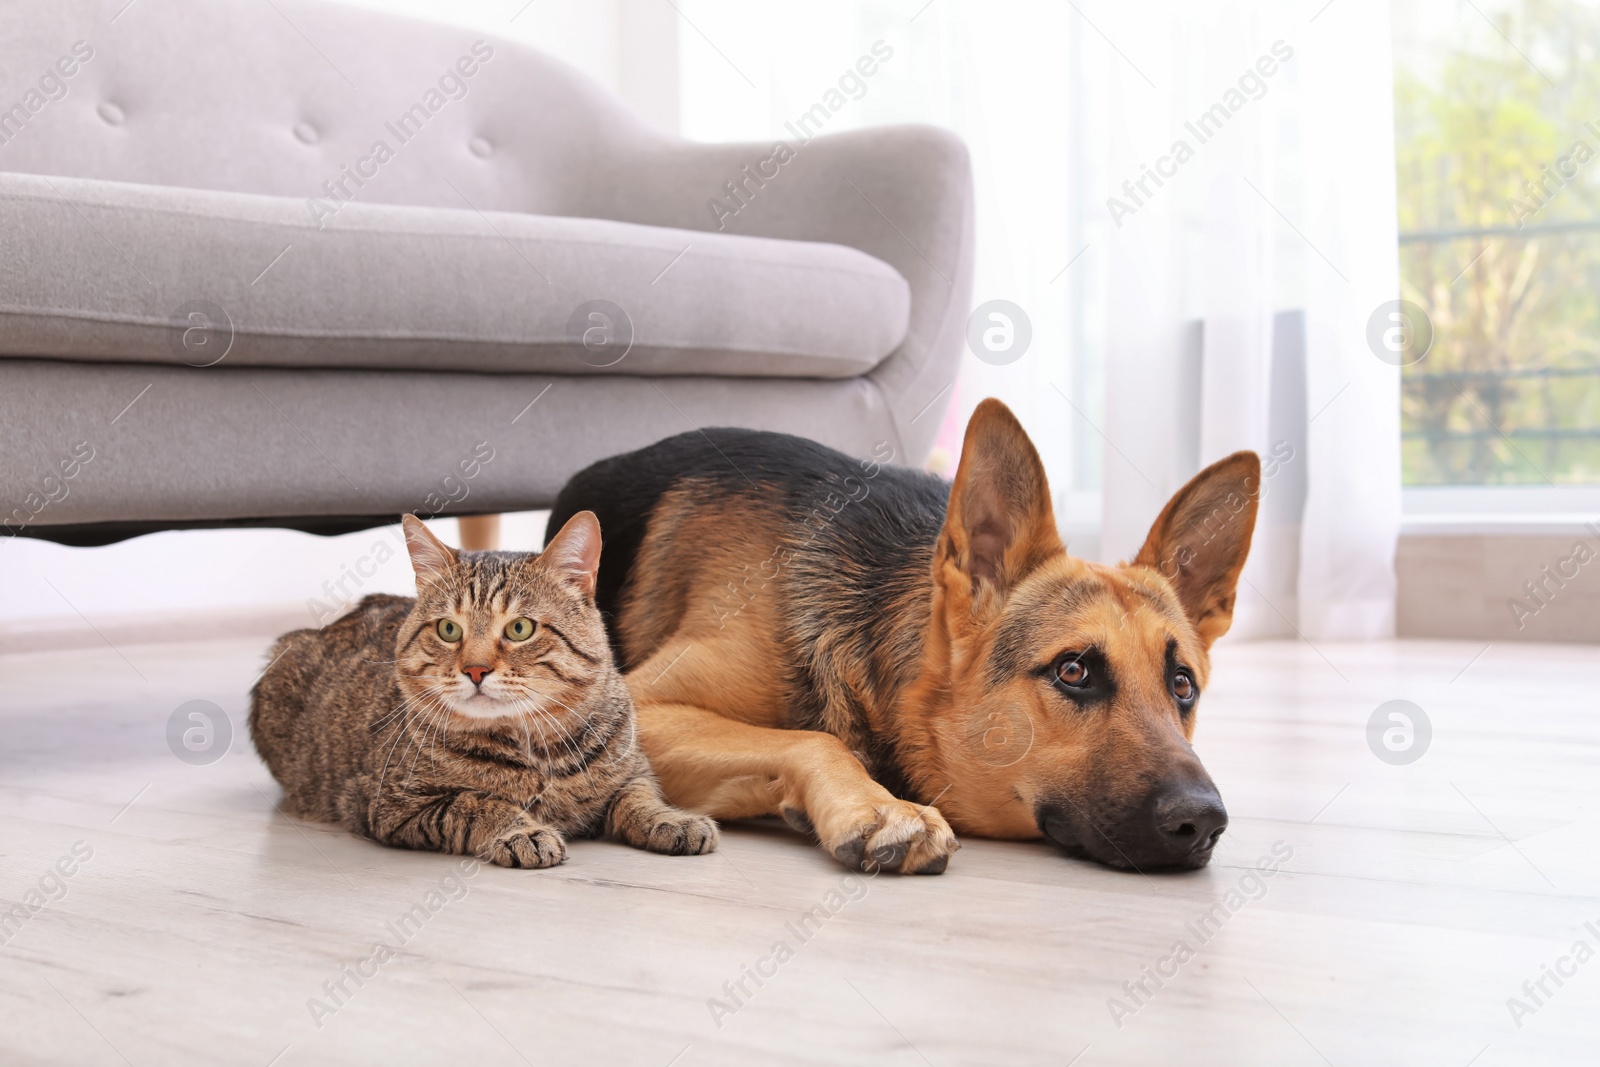 Photo of Adorable cat and dog resting together near sofa indoors. Animal friendship